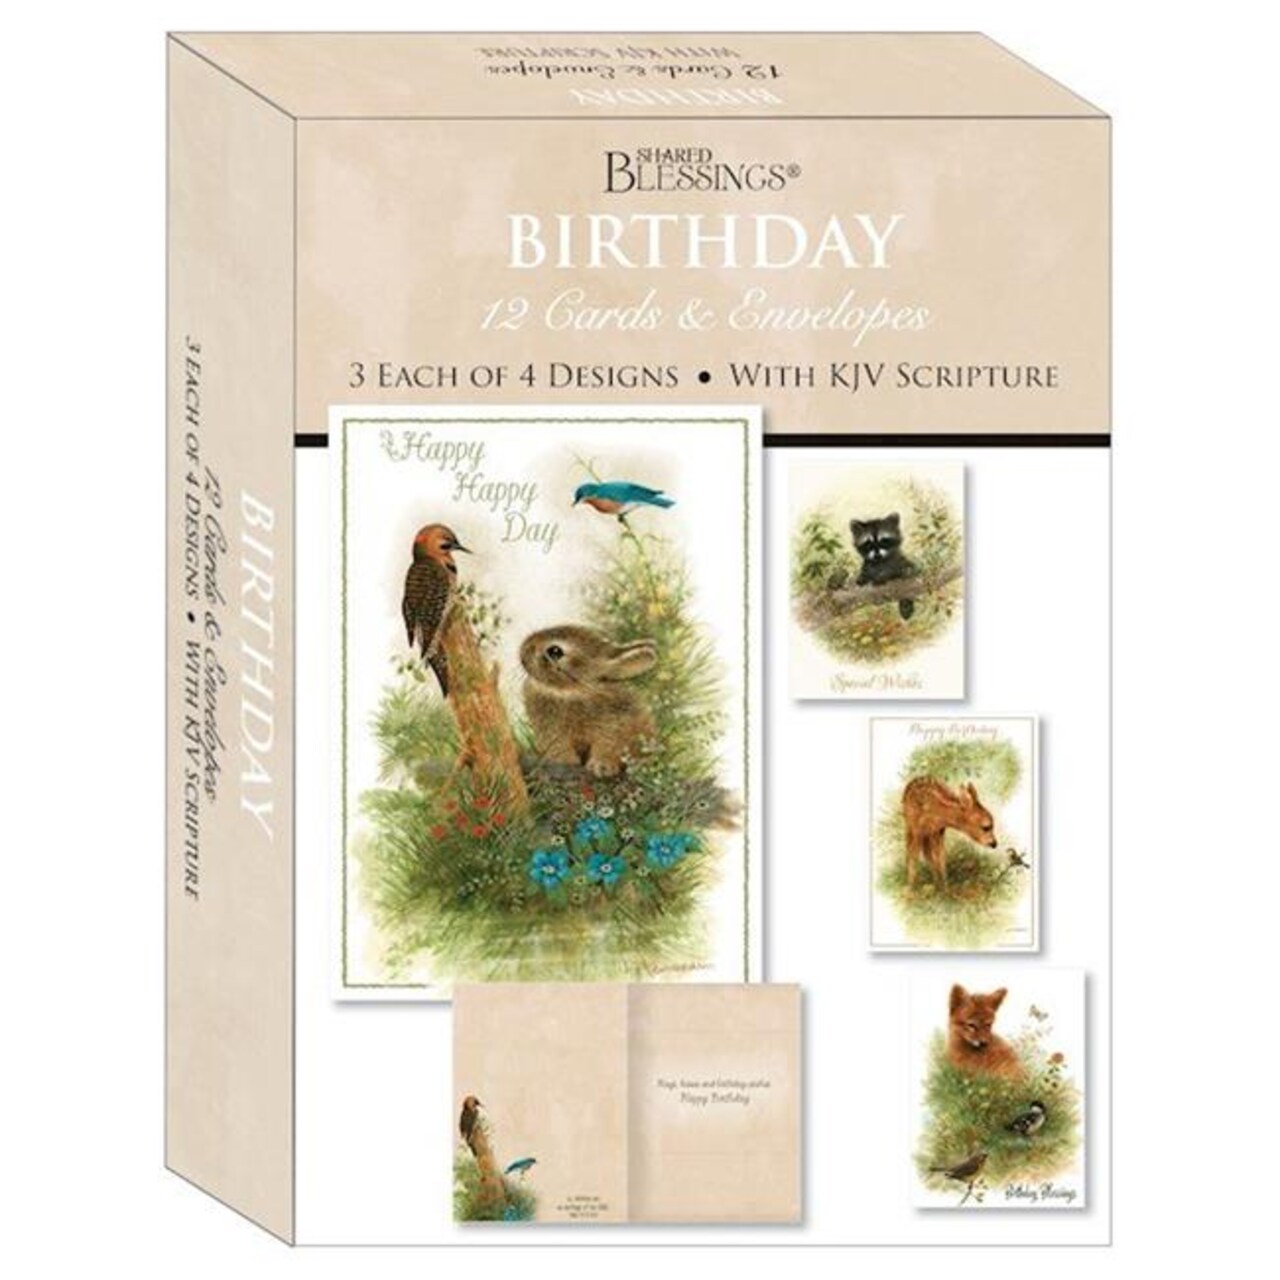 Crown Point Graphics 272439 Shared Blessings-Birthday Wildlife Card-Boxed - Box of 12